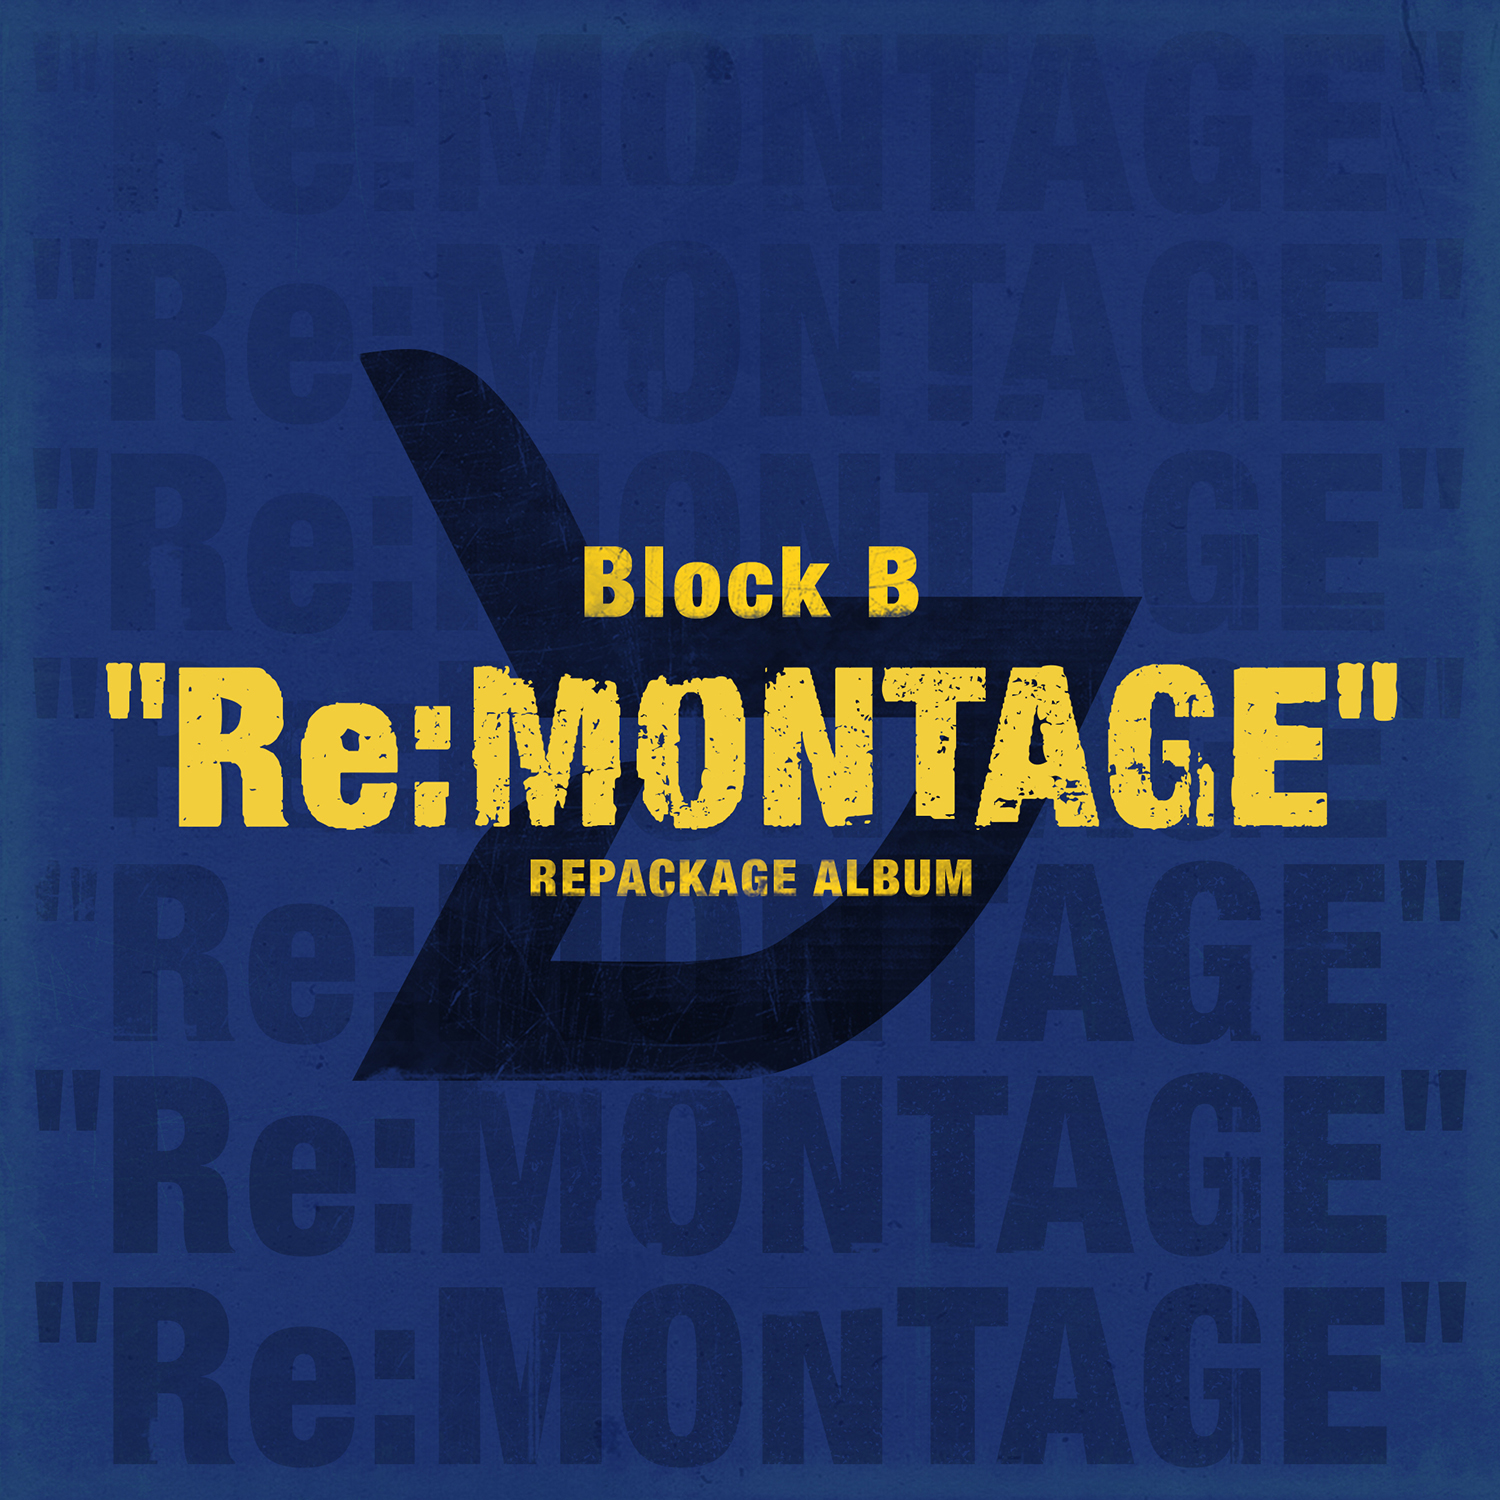 Re:MONTAGE